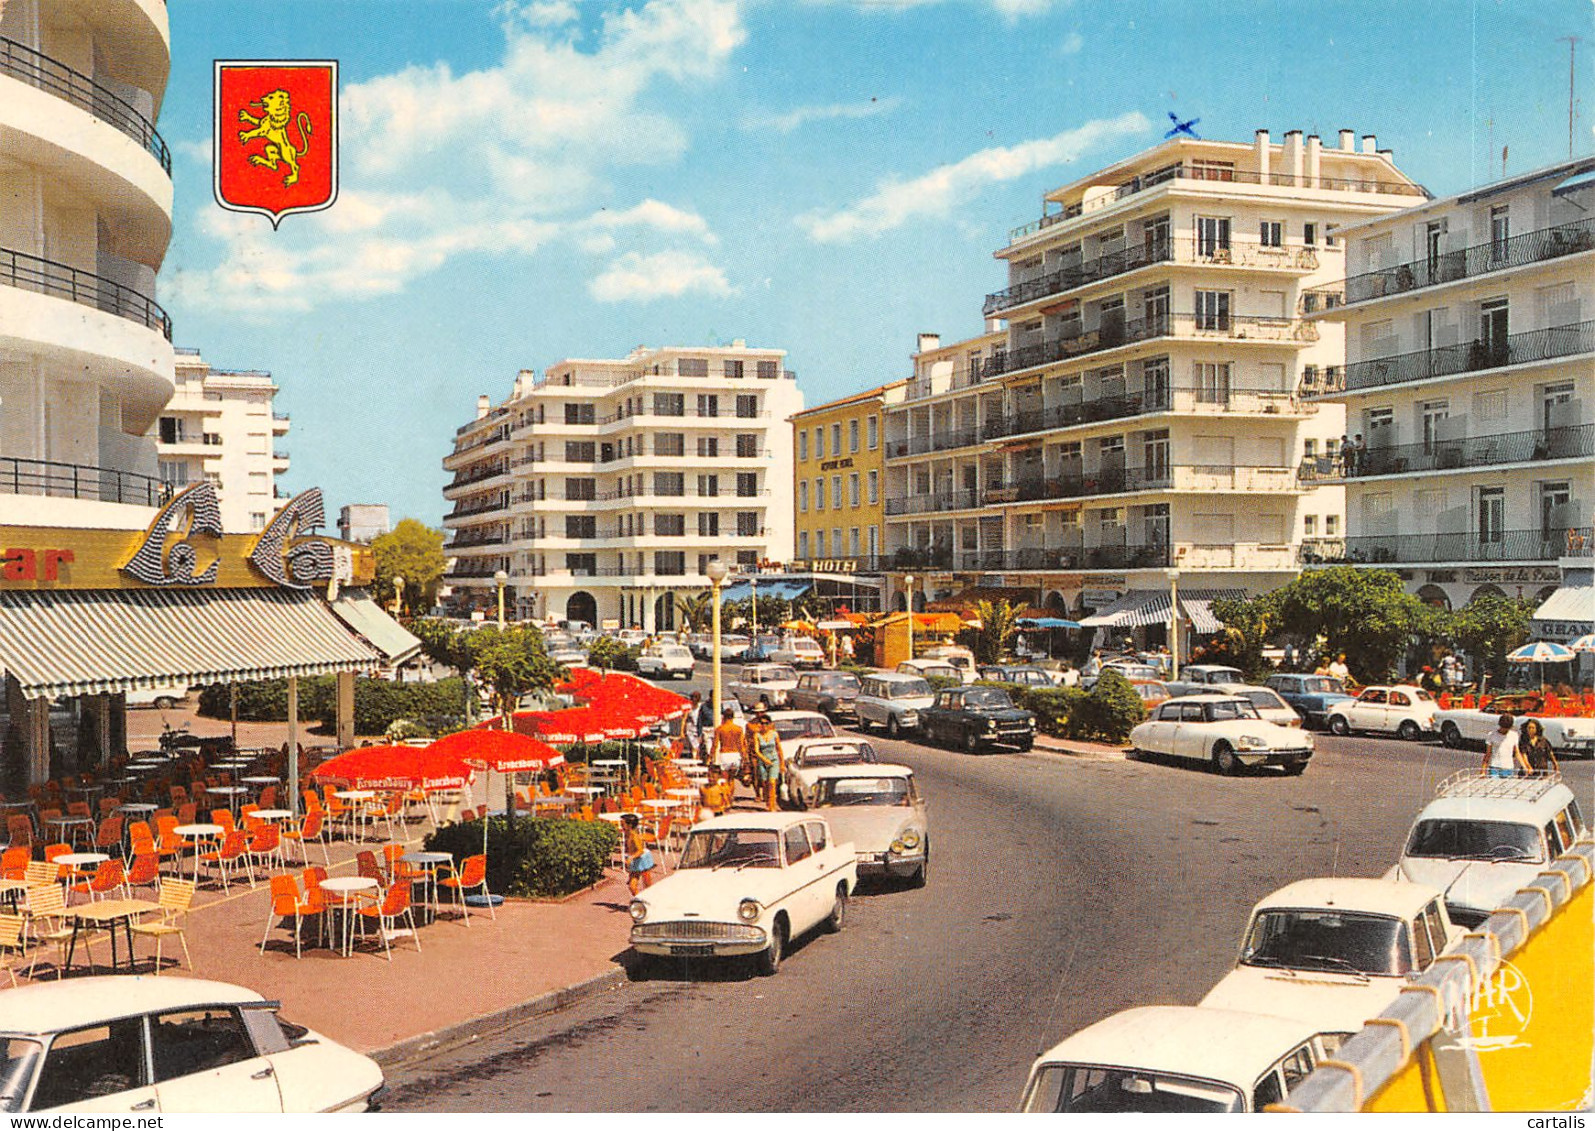 66-CANET PLAGE-N 603-A/0285 - Canet Plage